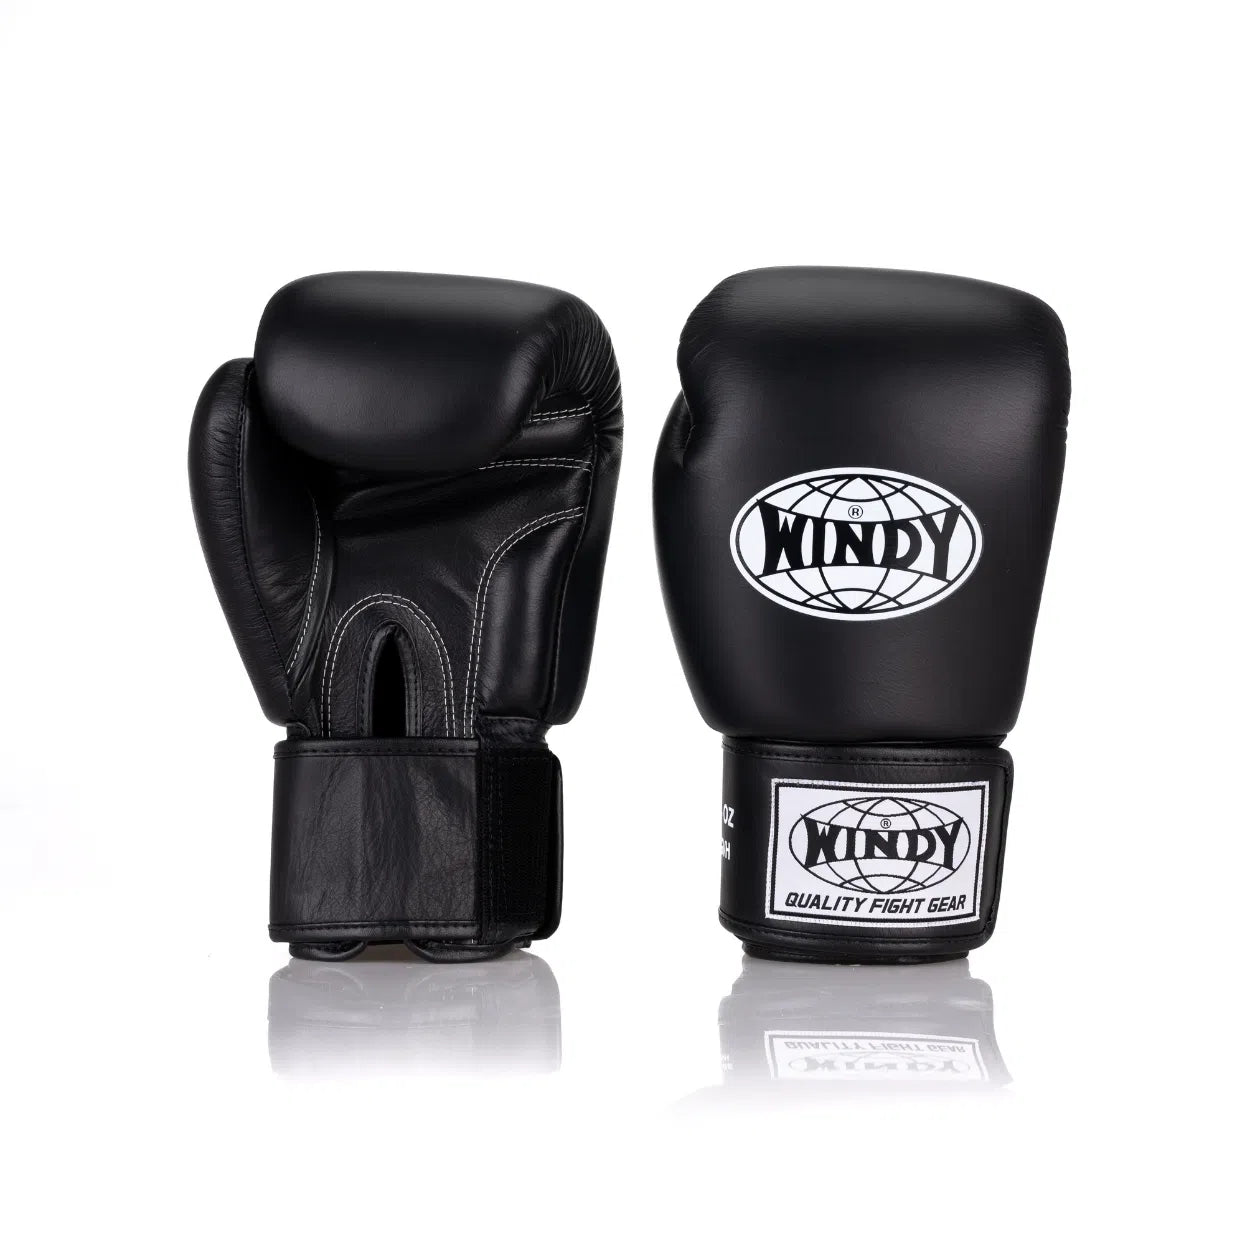 Classic Leather Boxing Glove - Black